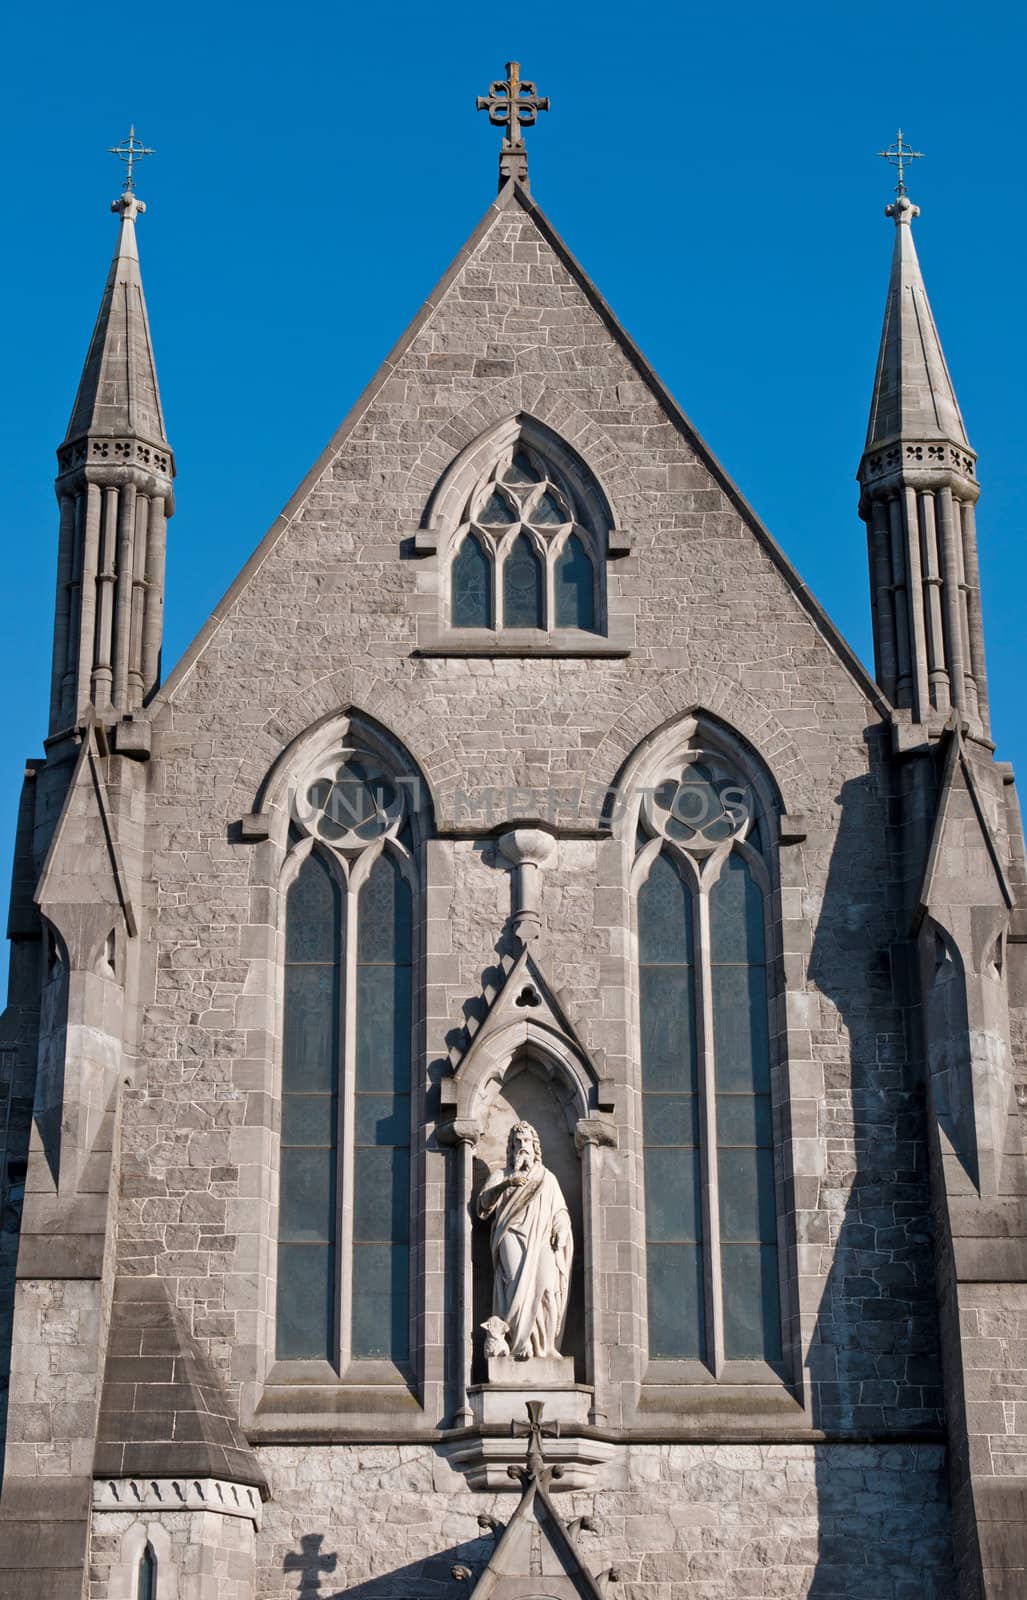 entrance detail with marble statue at Saint John's cathedral in Limerick, Ireland (blue sky background)